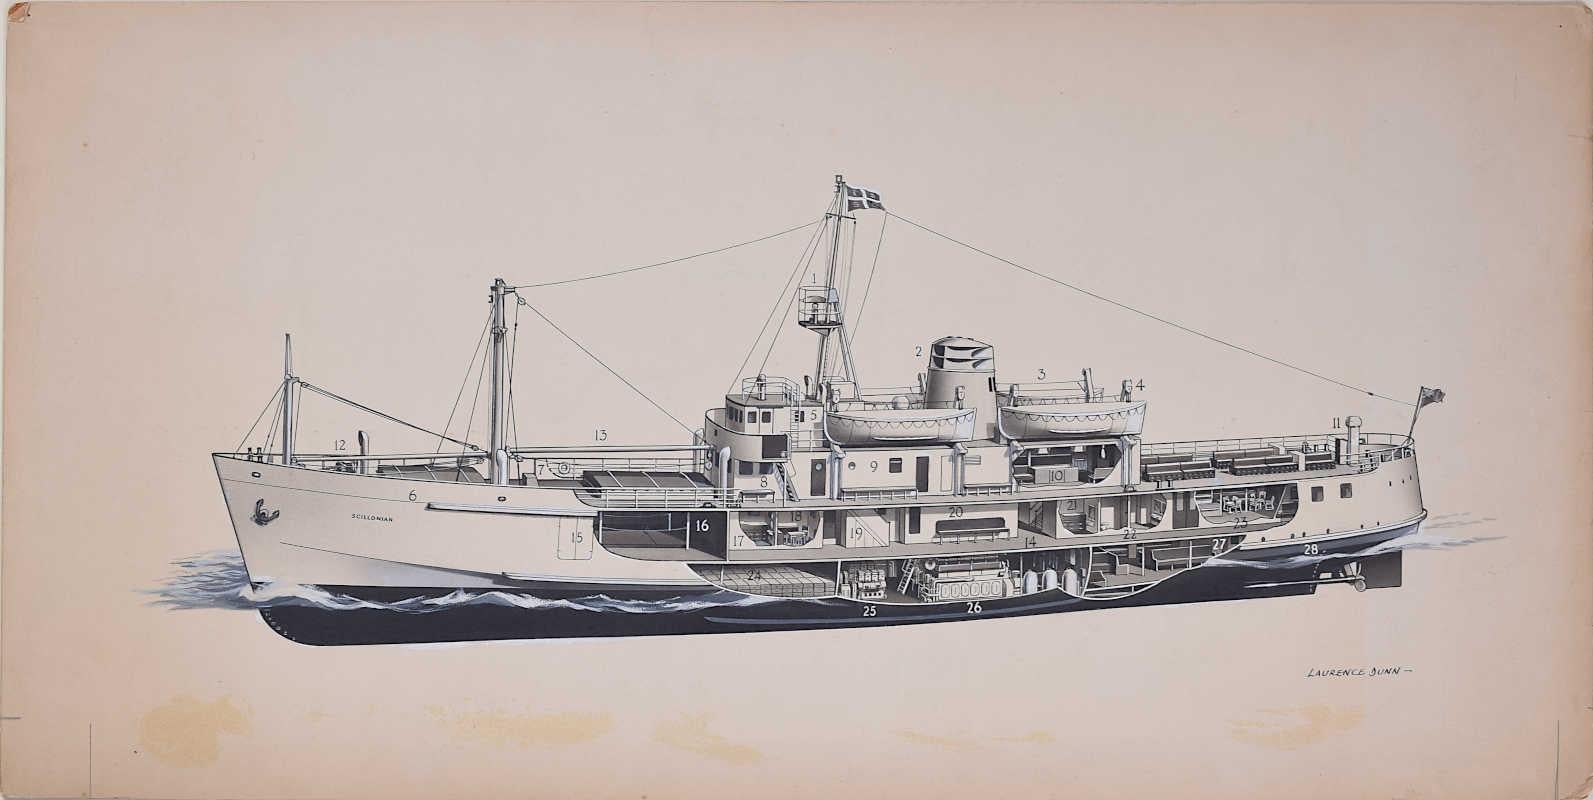 We acquired a series of marine works from Laurence Dunn's Archives. To find more scroll down to "More from this Seller" and below it click on "See all from this seller." 

Laurence Dunn (1910-2006)
SCILLONIAN, Isles of Scilly Ferry
Bodycolour and